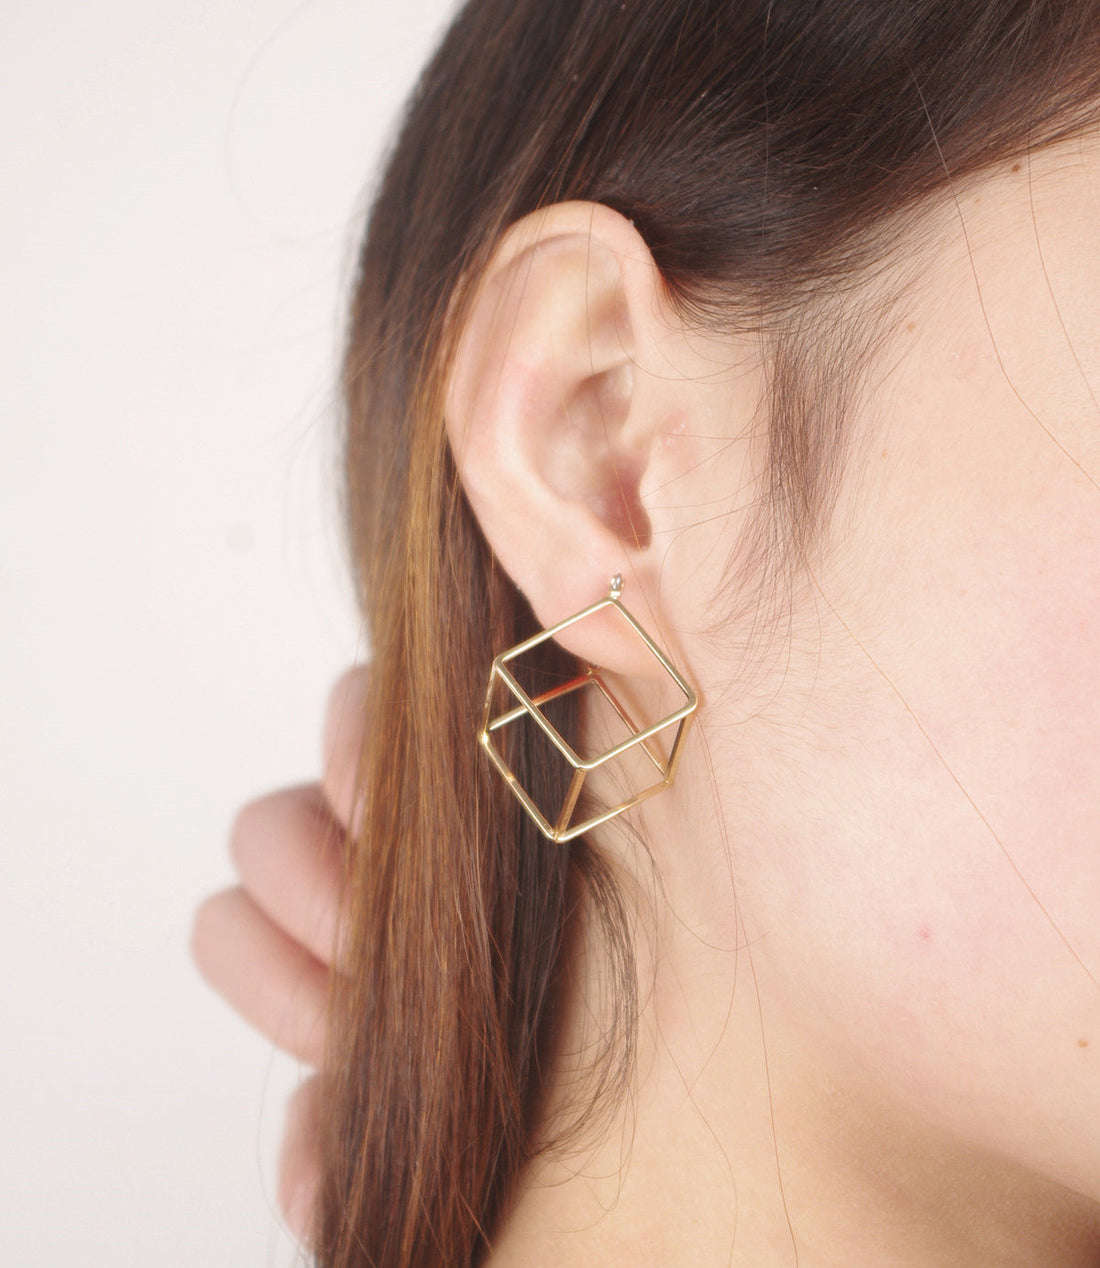 Fashion Cube Lady's Earrings - Oh Yours Fashion - 1